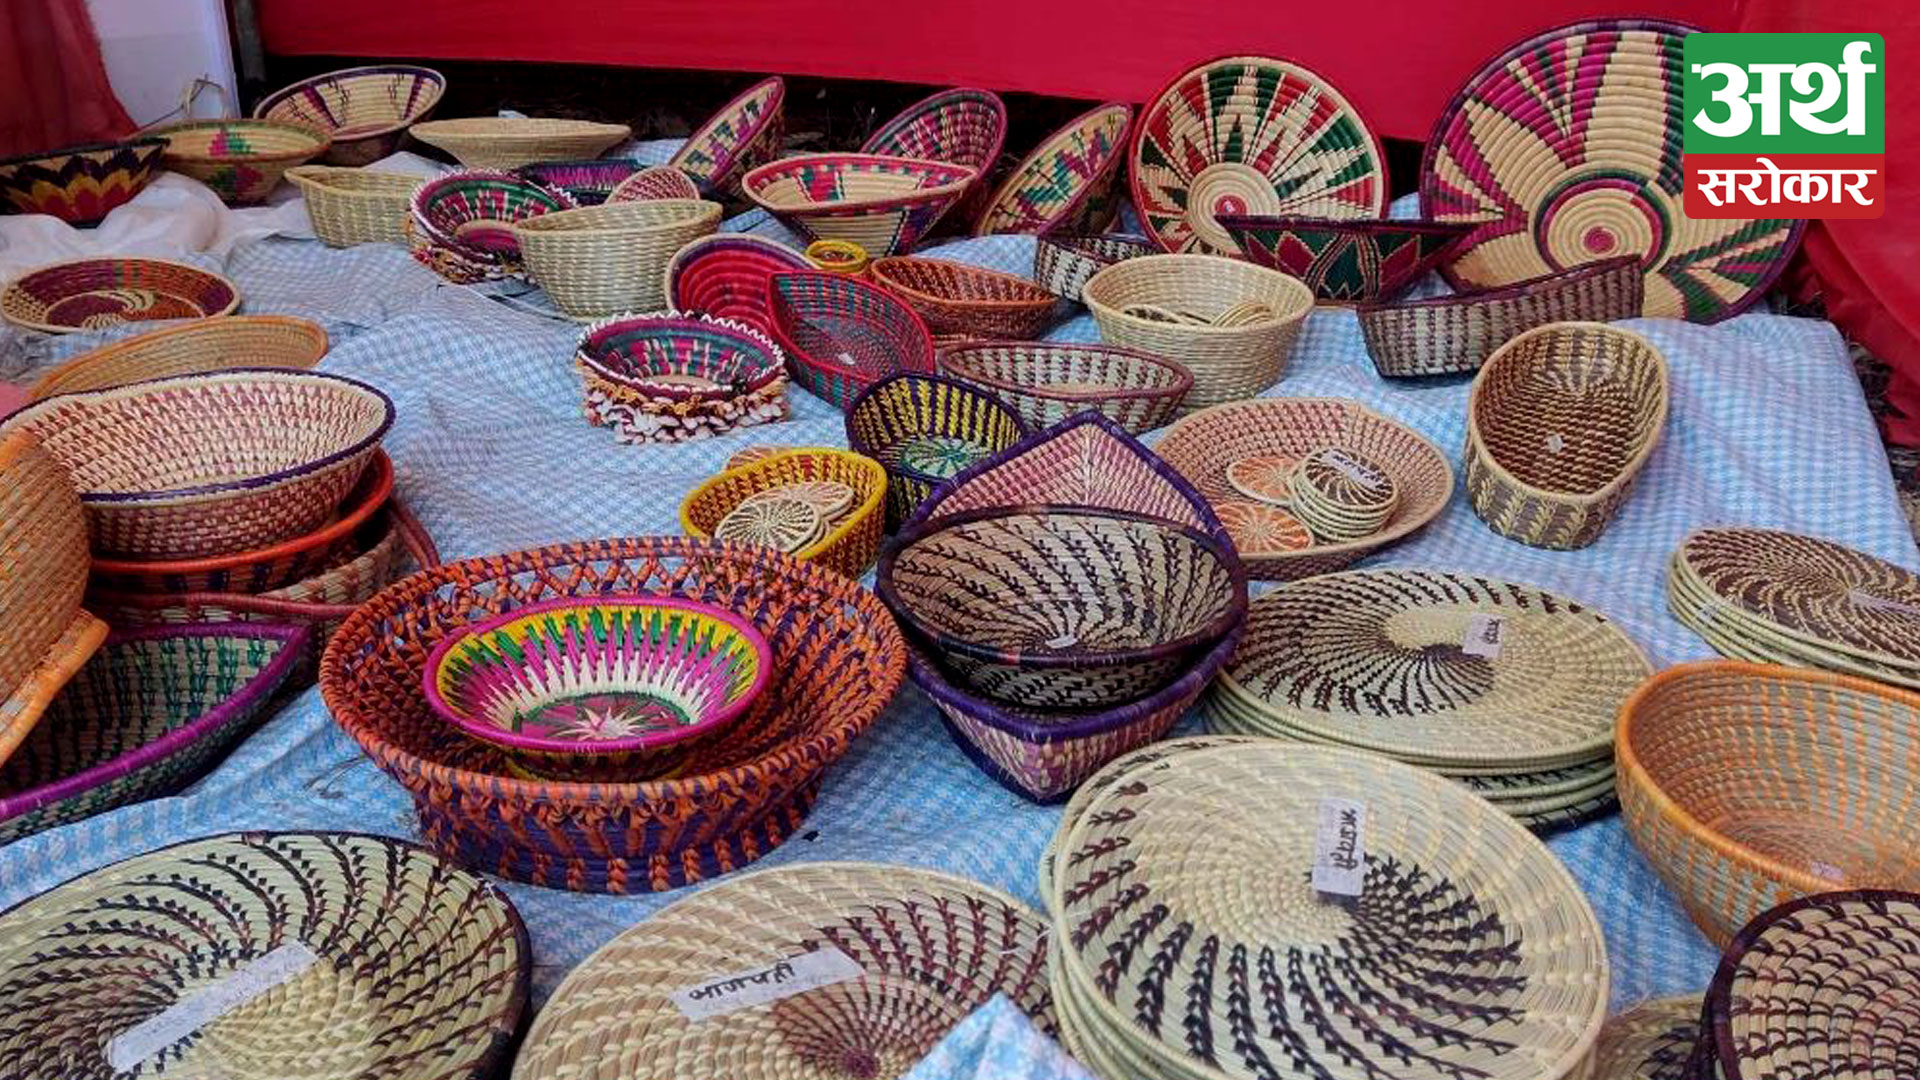 Handicrafts are becoming a lucrative business for women in Denmark